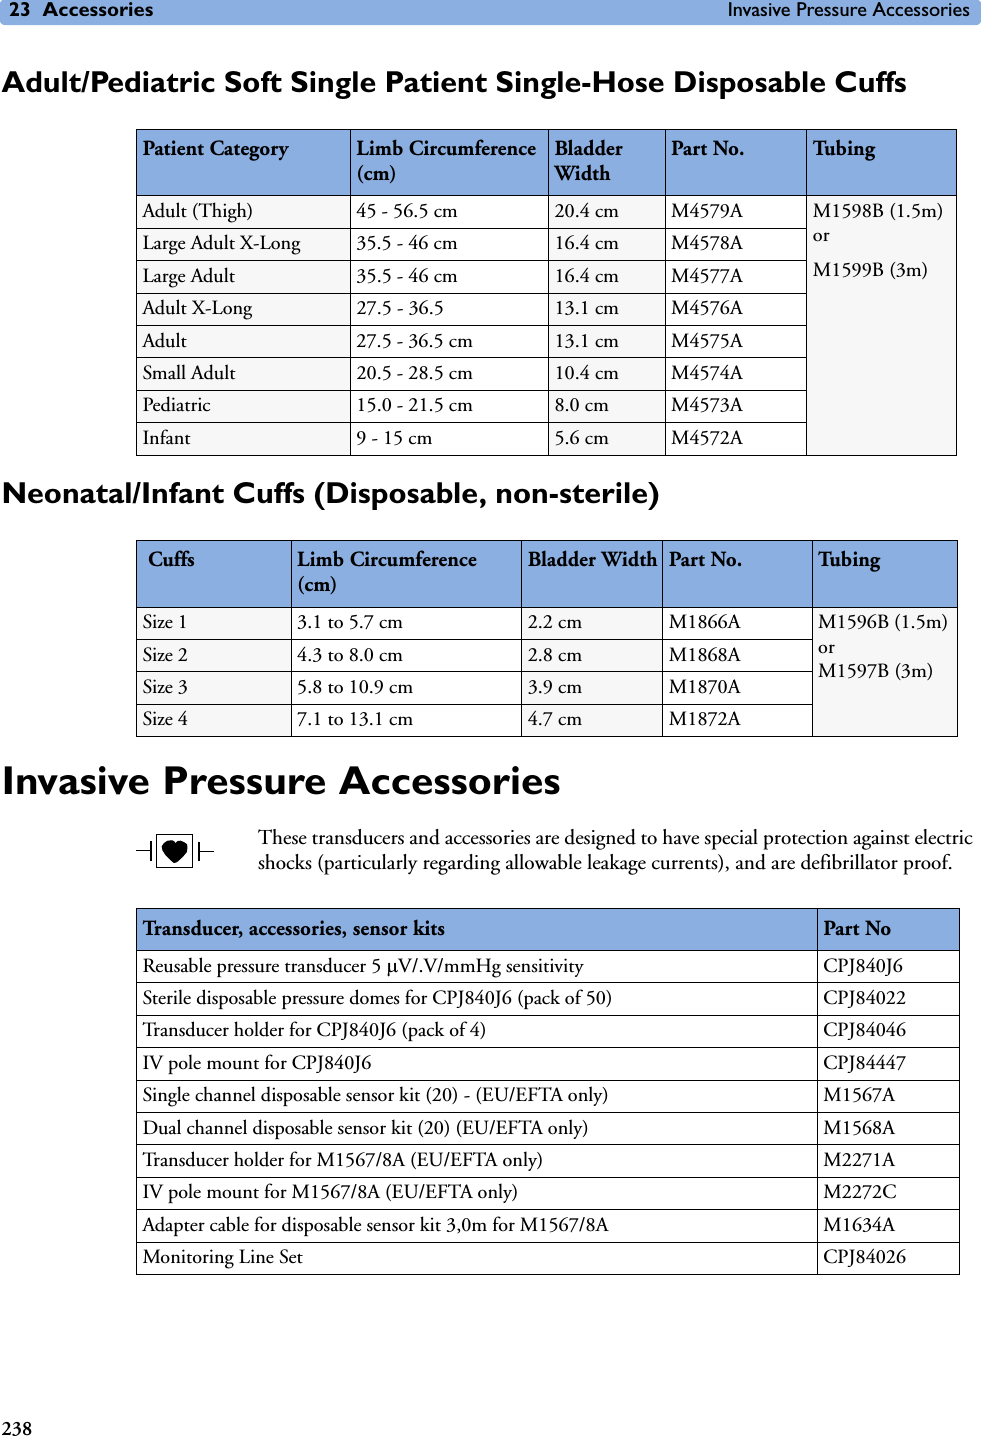 23 Accessories Invasive Pressure Accessories238Adult/Pediatric Soft Single Patient Single-Hose Disposable CuffsNeonatal/Infant Cuffs (Disposable, non-sterile)Invasive Pressure AccessoriesThese transducers and accessories are designed to have special protection against electric shocks (particularly regarding allowable leakage currents), and are defibrillator proof.Patient Category Limb Circumference (cm)Bladder WidthPart No.  Tu b i n gAdult (Thigh) 45 - 56.5 cm 20.4 cm M4579A M1598B (1.5m) or M1599B (3m)Large Adult X-Long 35.5 - 46 cm 16.4 cm M4578ALarge Adult 35.5 - 46 cm 16.4 cm M4577AAdult X-Long 27.5 - 36.5 13.1 cm M4576AAdult 27.5 - 36.5 cm 13.1 cm M4575ASmall Adult 20.5 - 28.5 cm 10.4 cm M4574APediatric 15.0 - 21.5 cm 8.0 cm M4573AInfant 9 - 15 cm 5.6 cm M4572A Cuffs Limb Circumference (cm)Bladder Width Part No.  Tu b i n gSize 1 3.1 to 5.7 cm 2.2 cm M1866A M1596B (1.5m) or M1597B (3m)Size 2 4.3 to 8.0 cm 2.8 cm M1868ASize 3 5.8 to 10.9 cm 3.9 cm M1870ASize 4 7.1 to 13.1 cm 4.7 cm M1872ATransducer, accessories, sensor kits Part NoReusable pressure transducer 5 PV/.V/mmHg sensitivity CPJ840J6Sterile disposable pressure domes for CPJ840J6 (pack of 50) CPJ84022Transducer holder for CPJ840J6 (pack of 4) CPJ84046IV pole mount for CPJ840J6 CPJ84447Single channel disposable sensor kit (20) - (EU/EFTA only) M1567ADual channel disposable sensor kit (20) (EU/EFTA only) M1568ATransducer holder for M1567/8A (EU/EFTA only) M2271AIV pole mount for M1567/8A (EU/EFTA only) M2272CAdapter cable for disposable sensor kit 3,0m for M1567/8A M1634AMonitoring Line Set CPJ84026